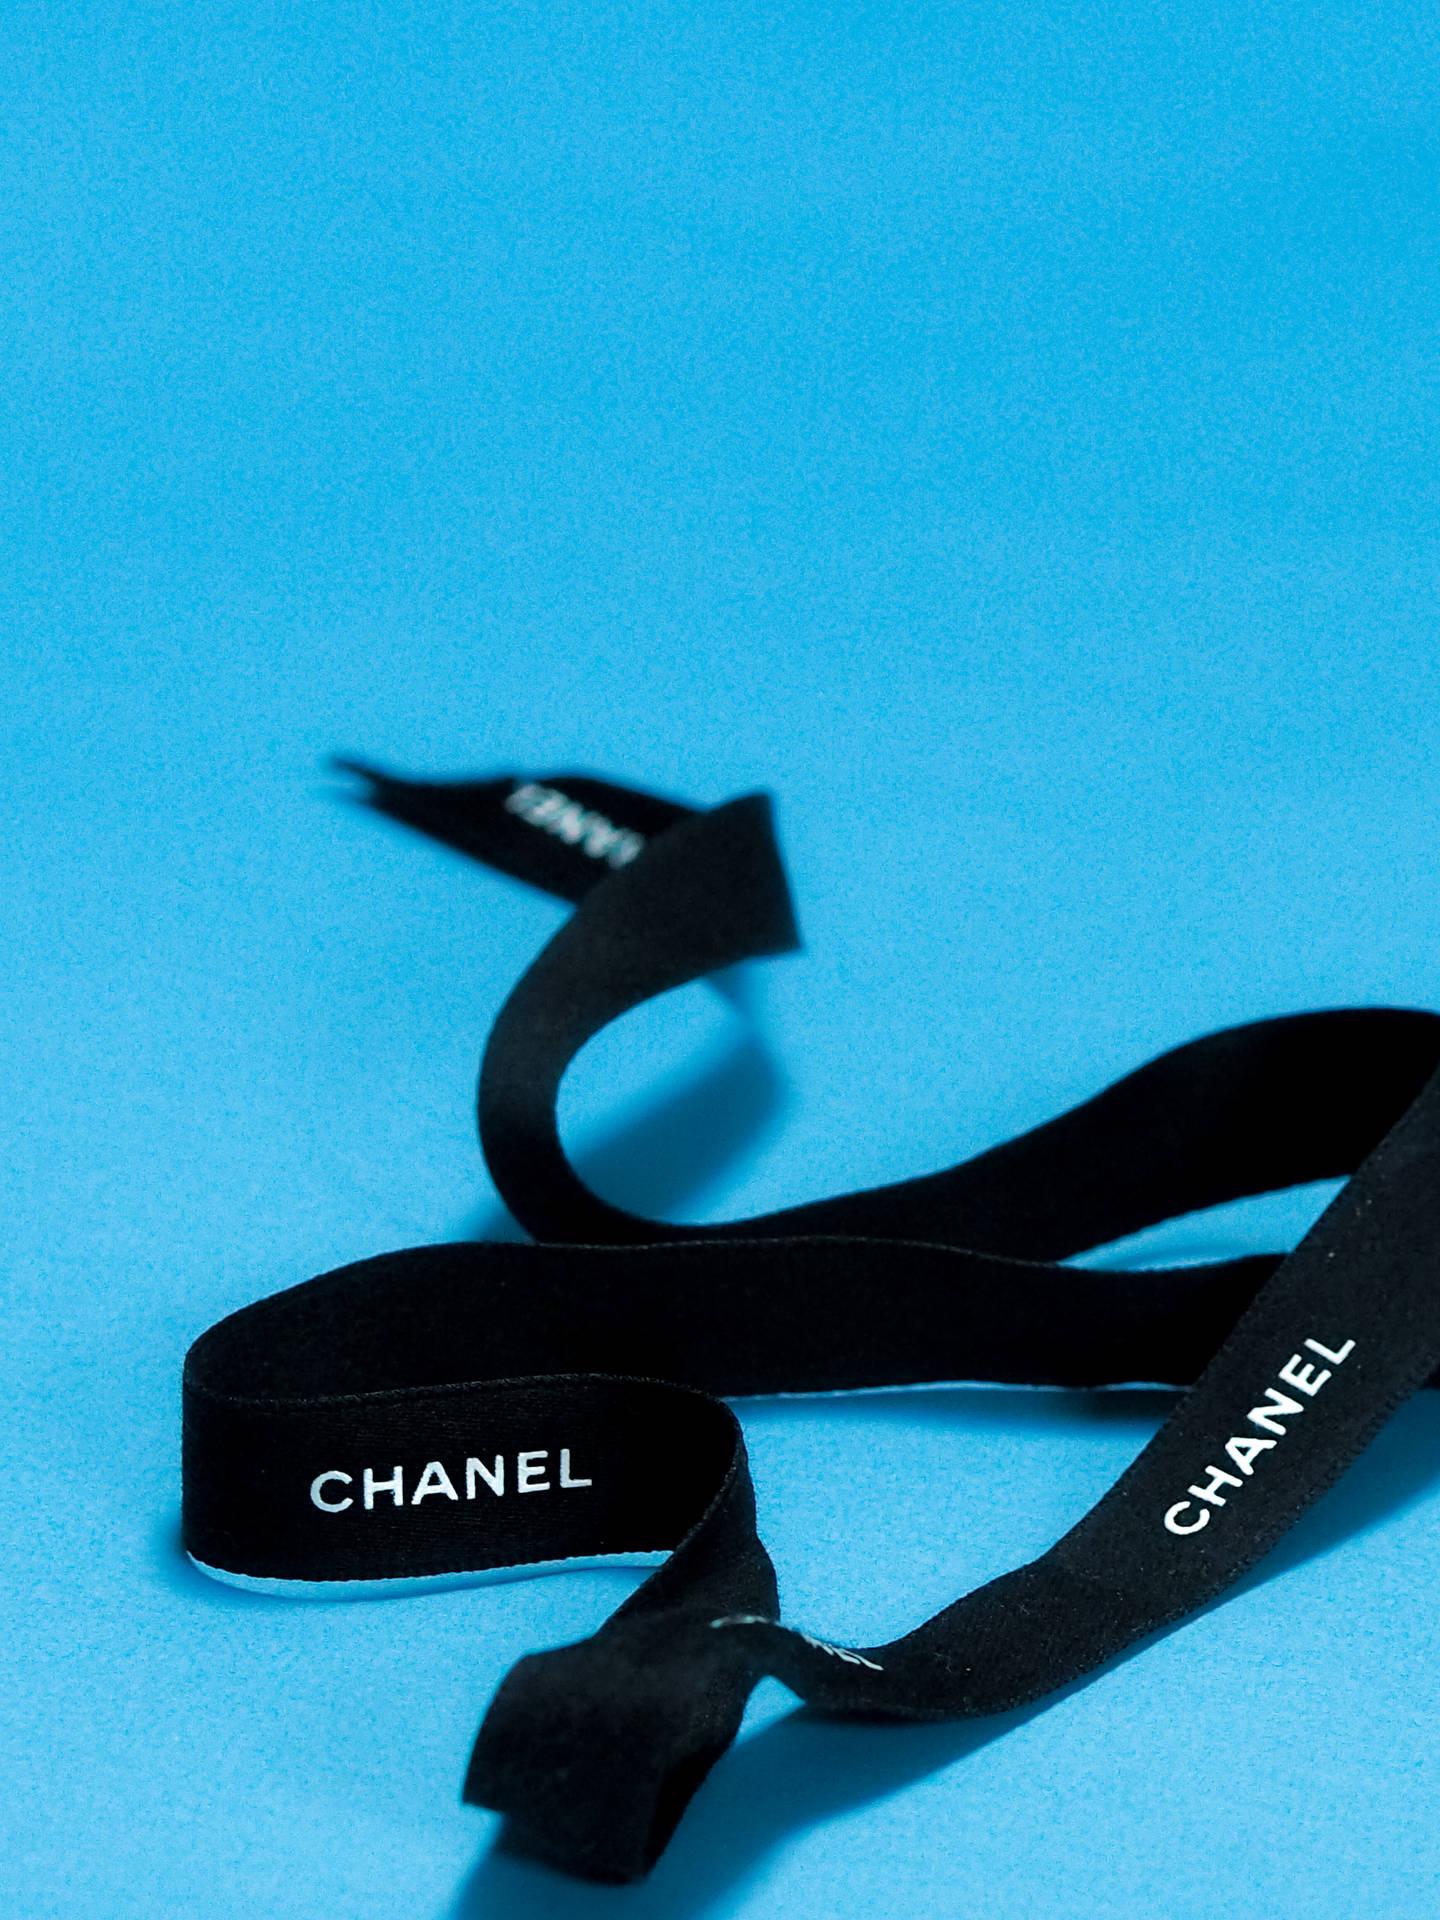 Chanel 3456X4608 Wallpaper and Background Image